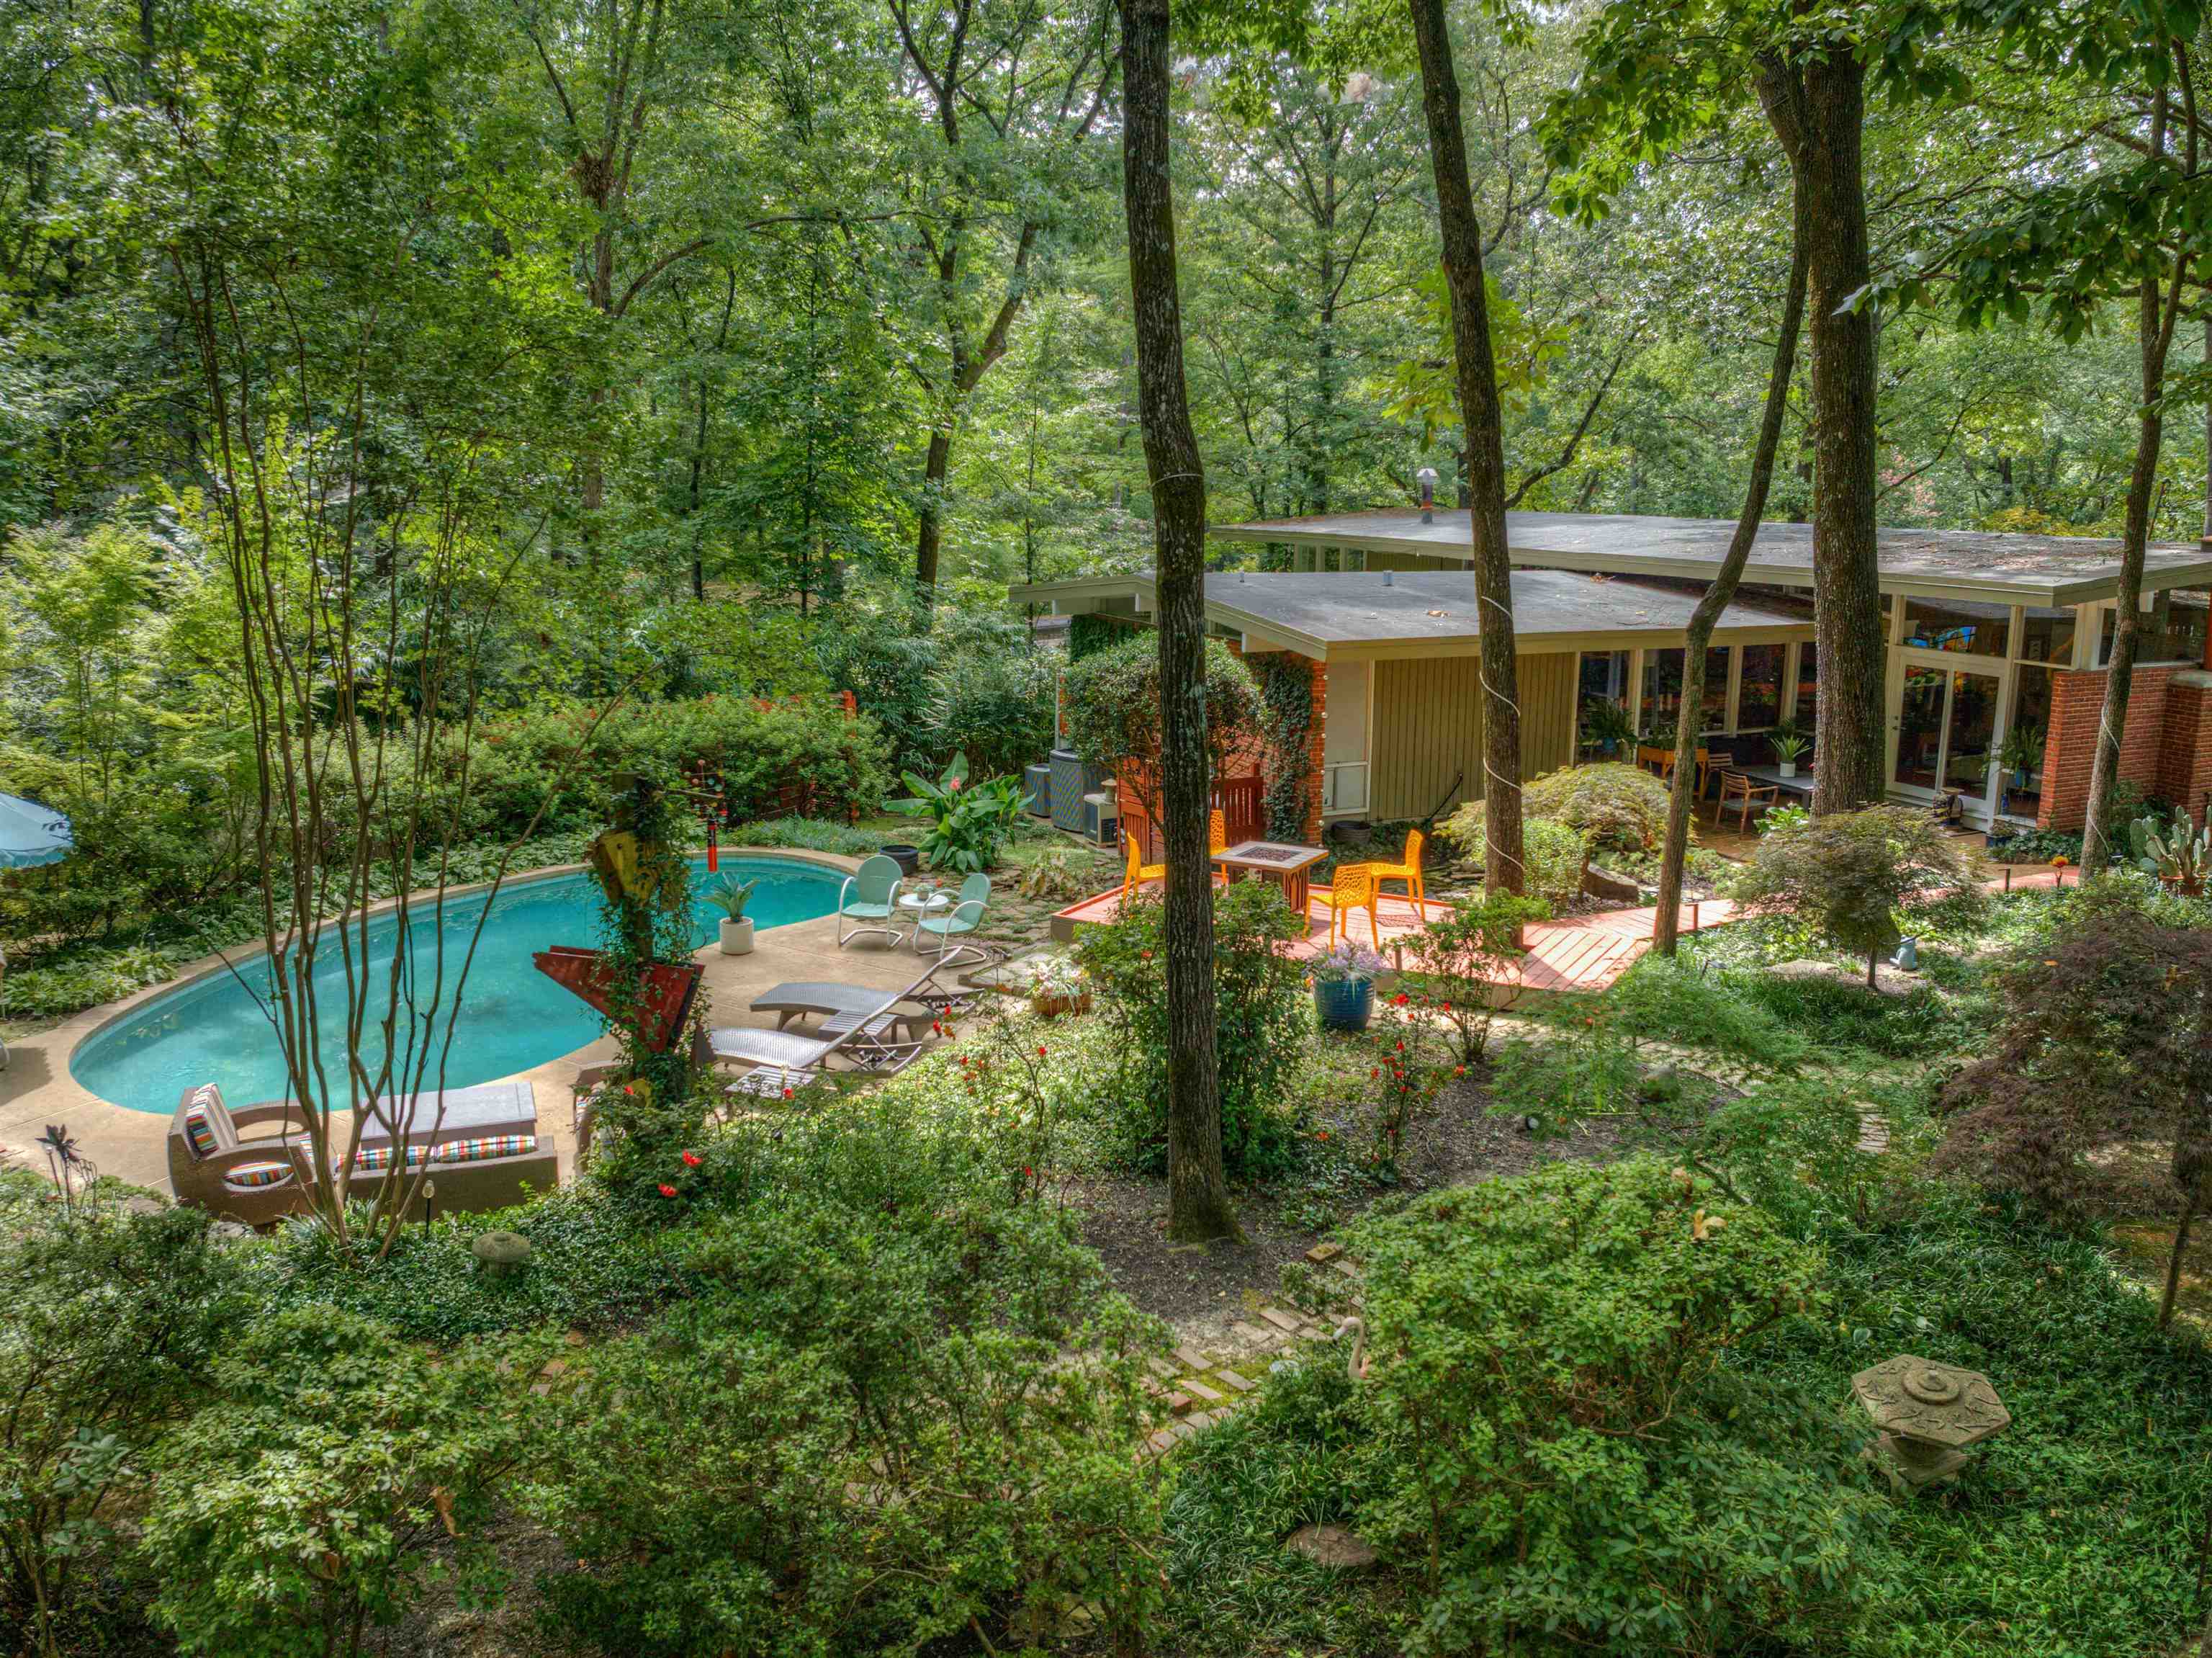 Look at this oasis of fabulousness right in the heart of East Memphis. The back of the house is mostly glass allowing you to feel one with nature while inside. All the lovely trees, zen gardens, decks, and pool, make for one of a kind outdoor living!